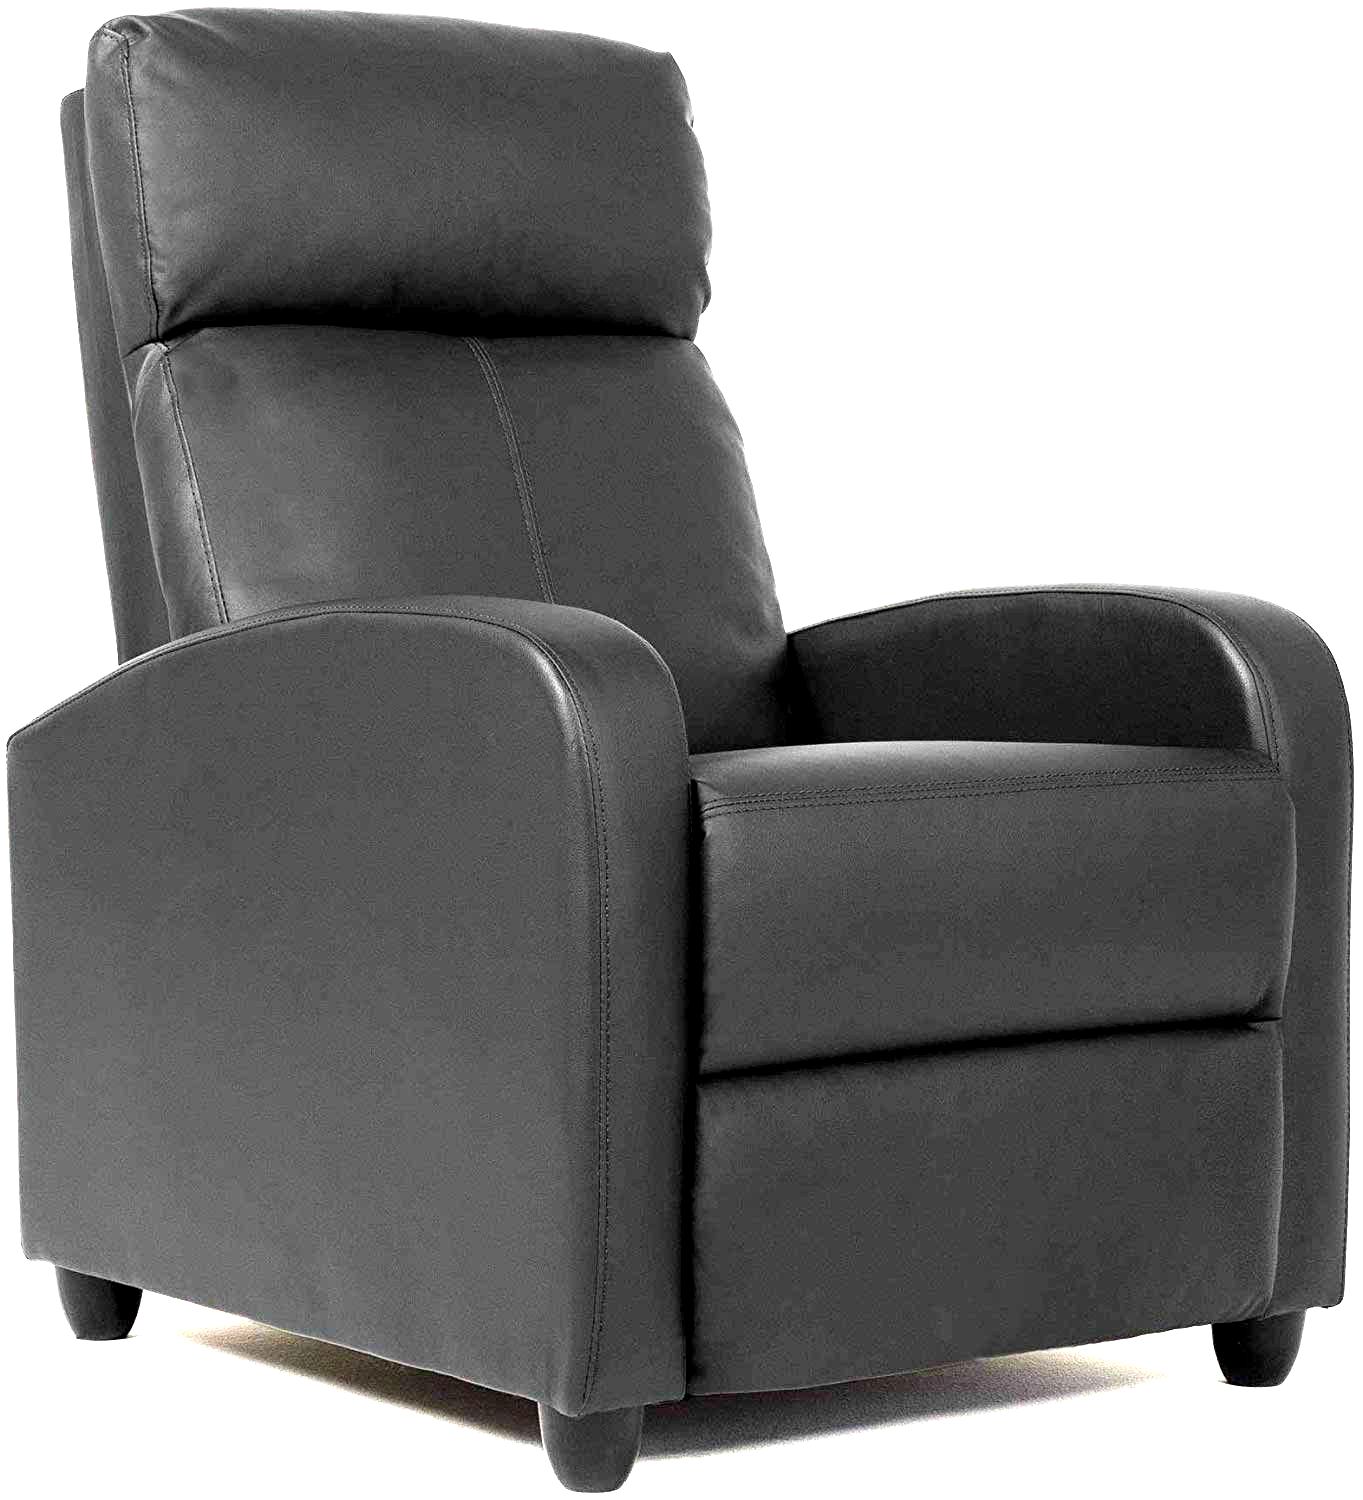 FDW for Living Room Recliner